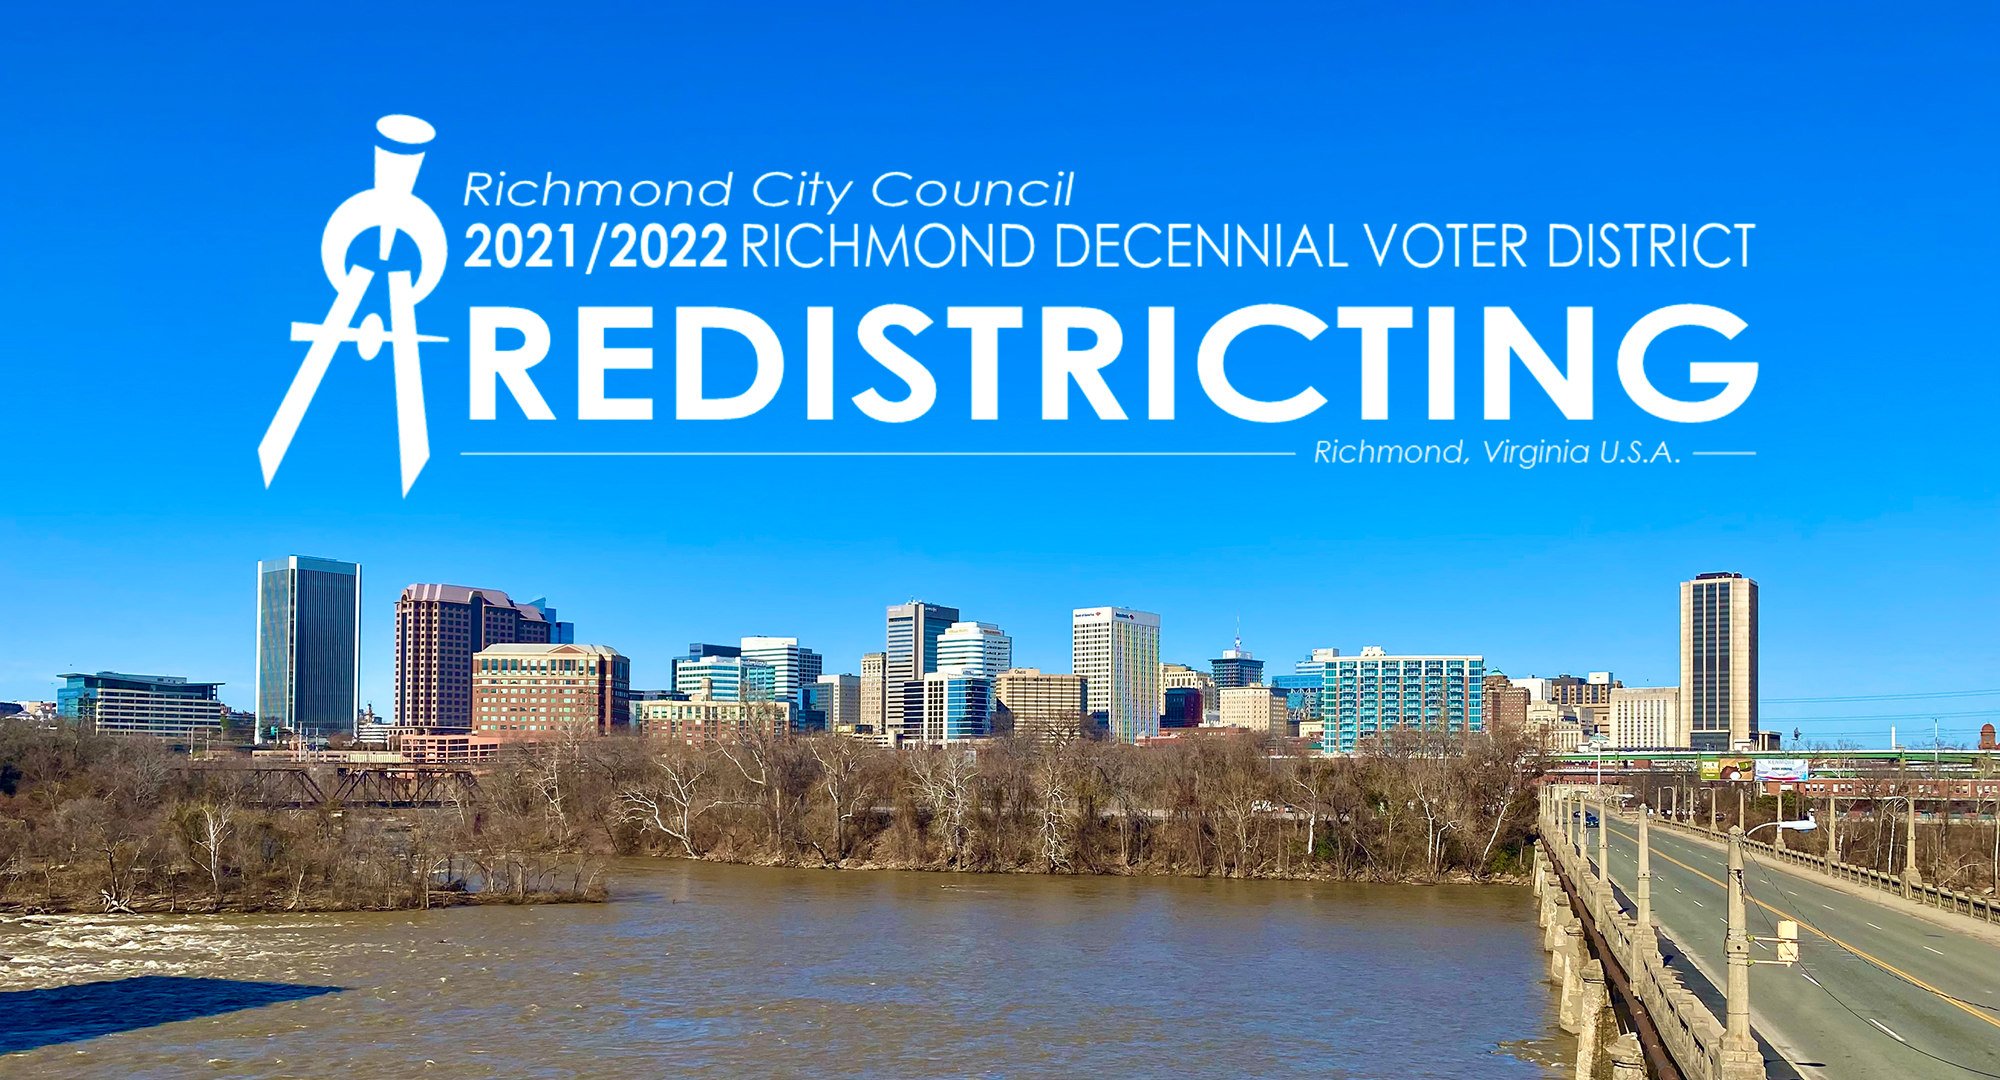 Redistricting logo above image of Richmond city skyline and the James River